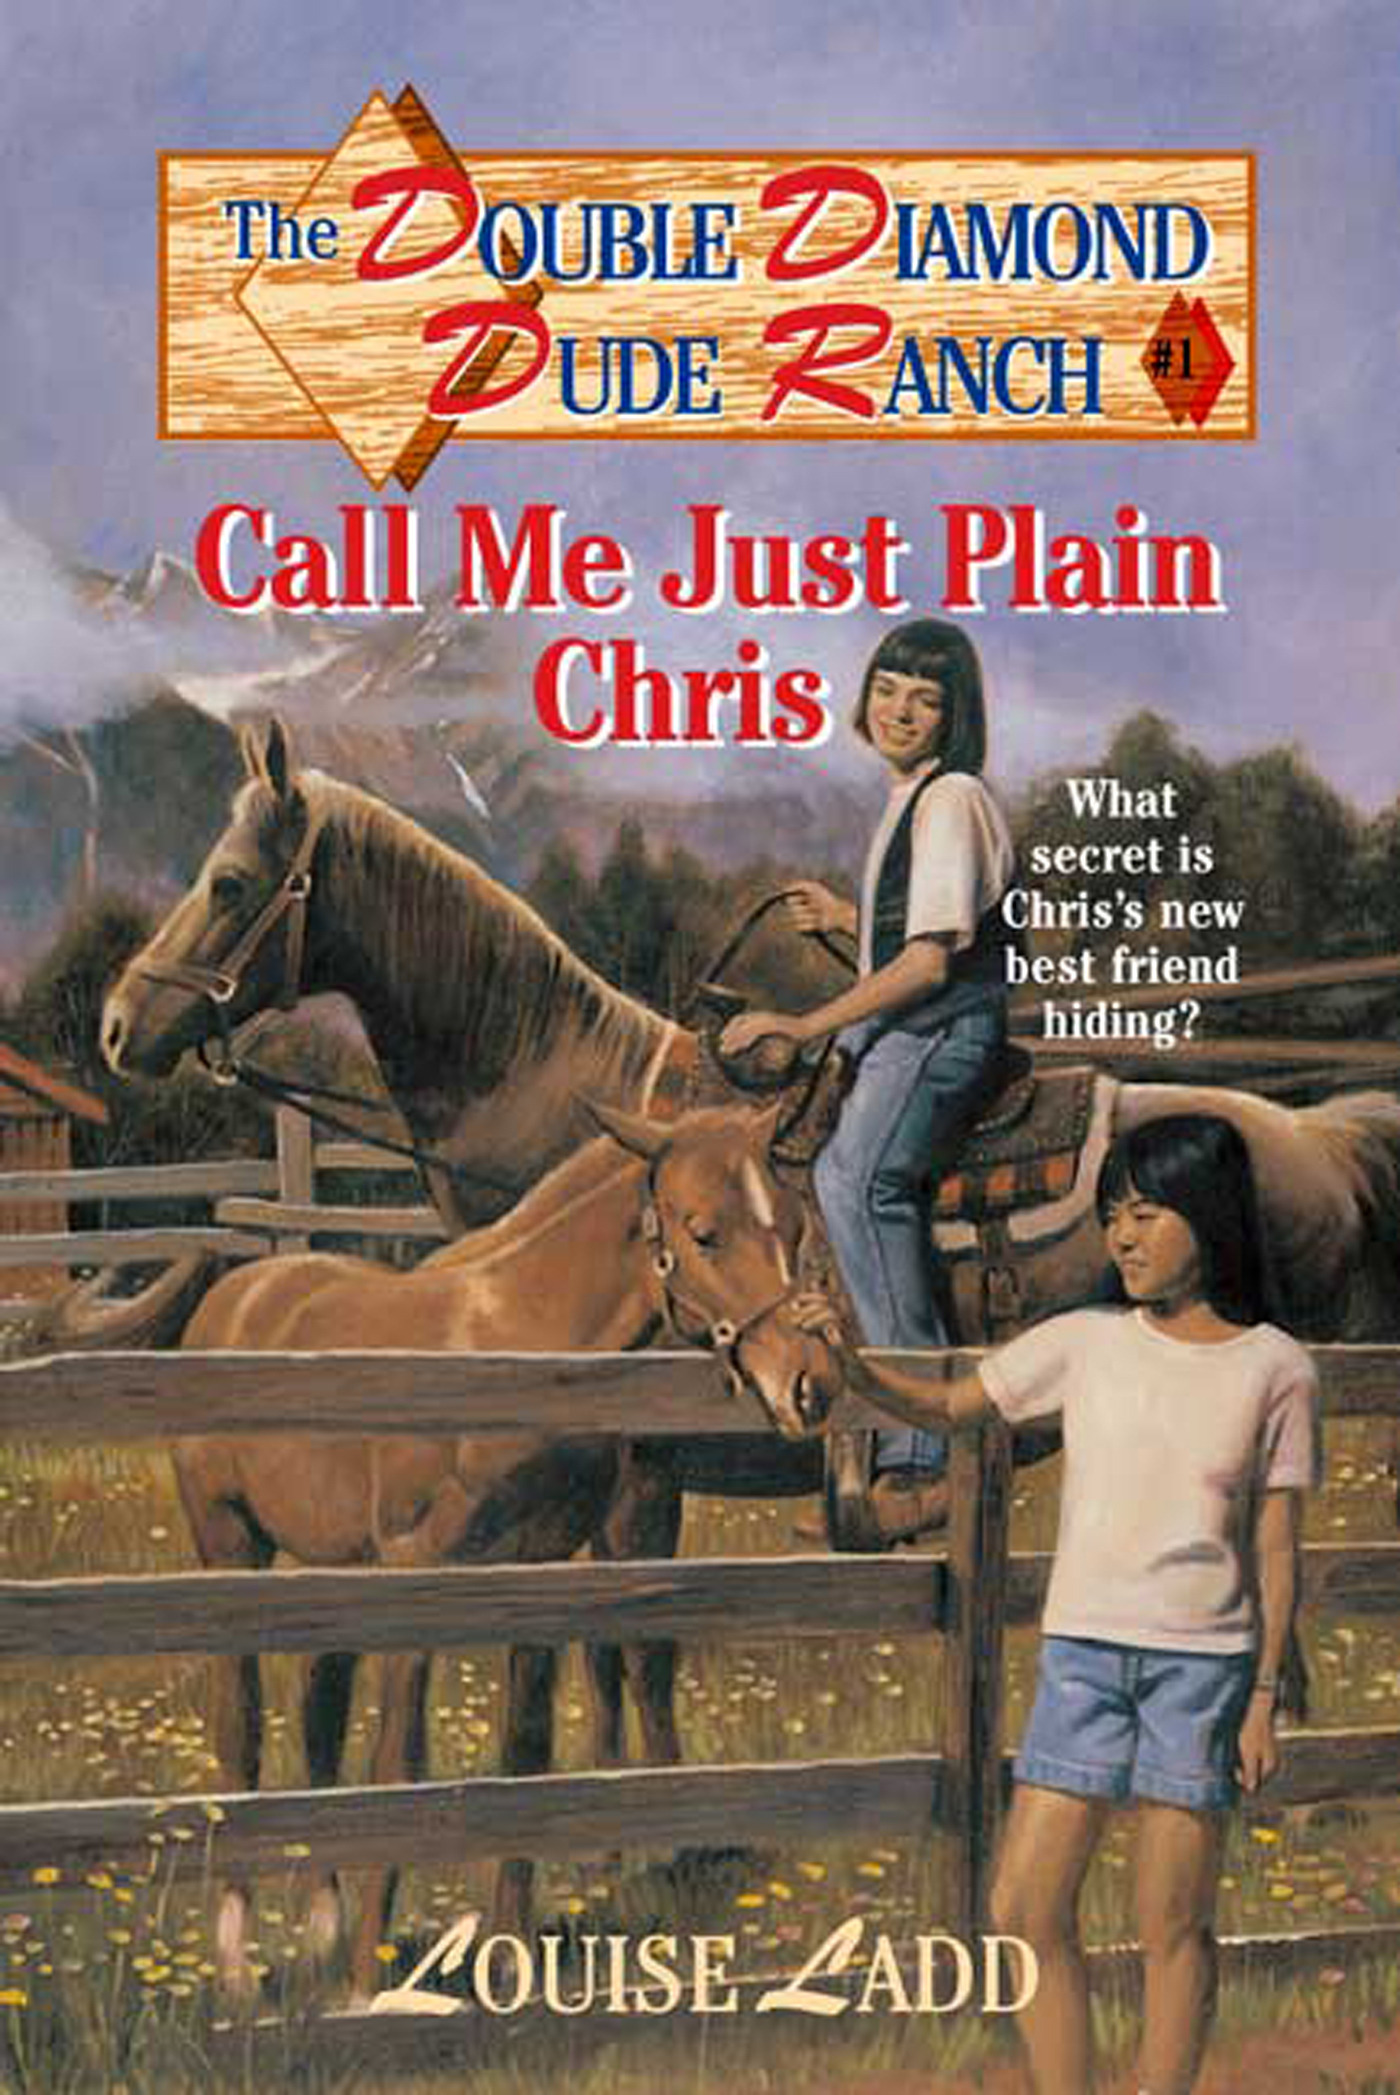 Double Diamond Dude Ranch #1 - Call Me Just Plain Chris by Louise Ladd